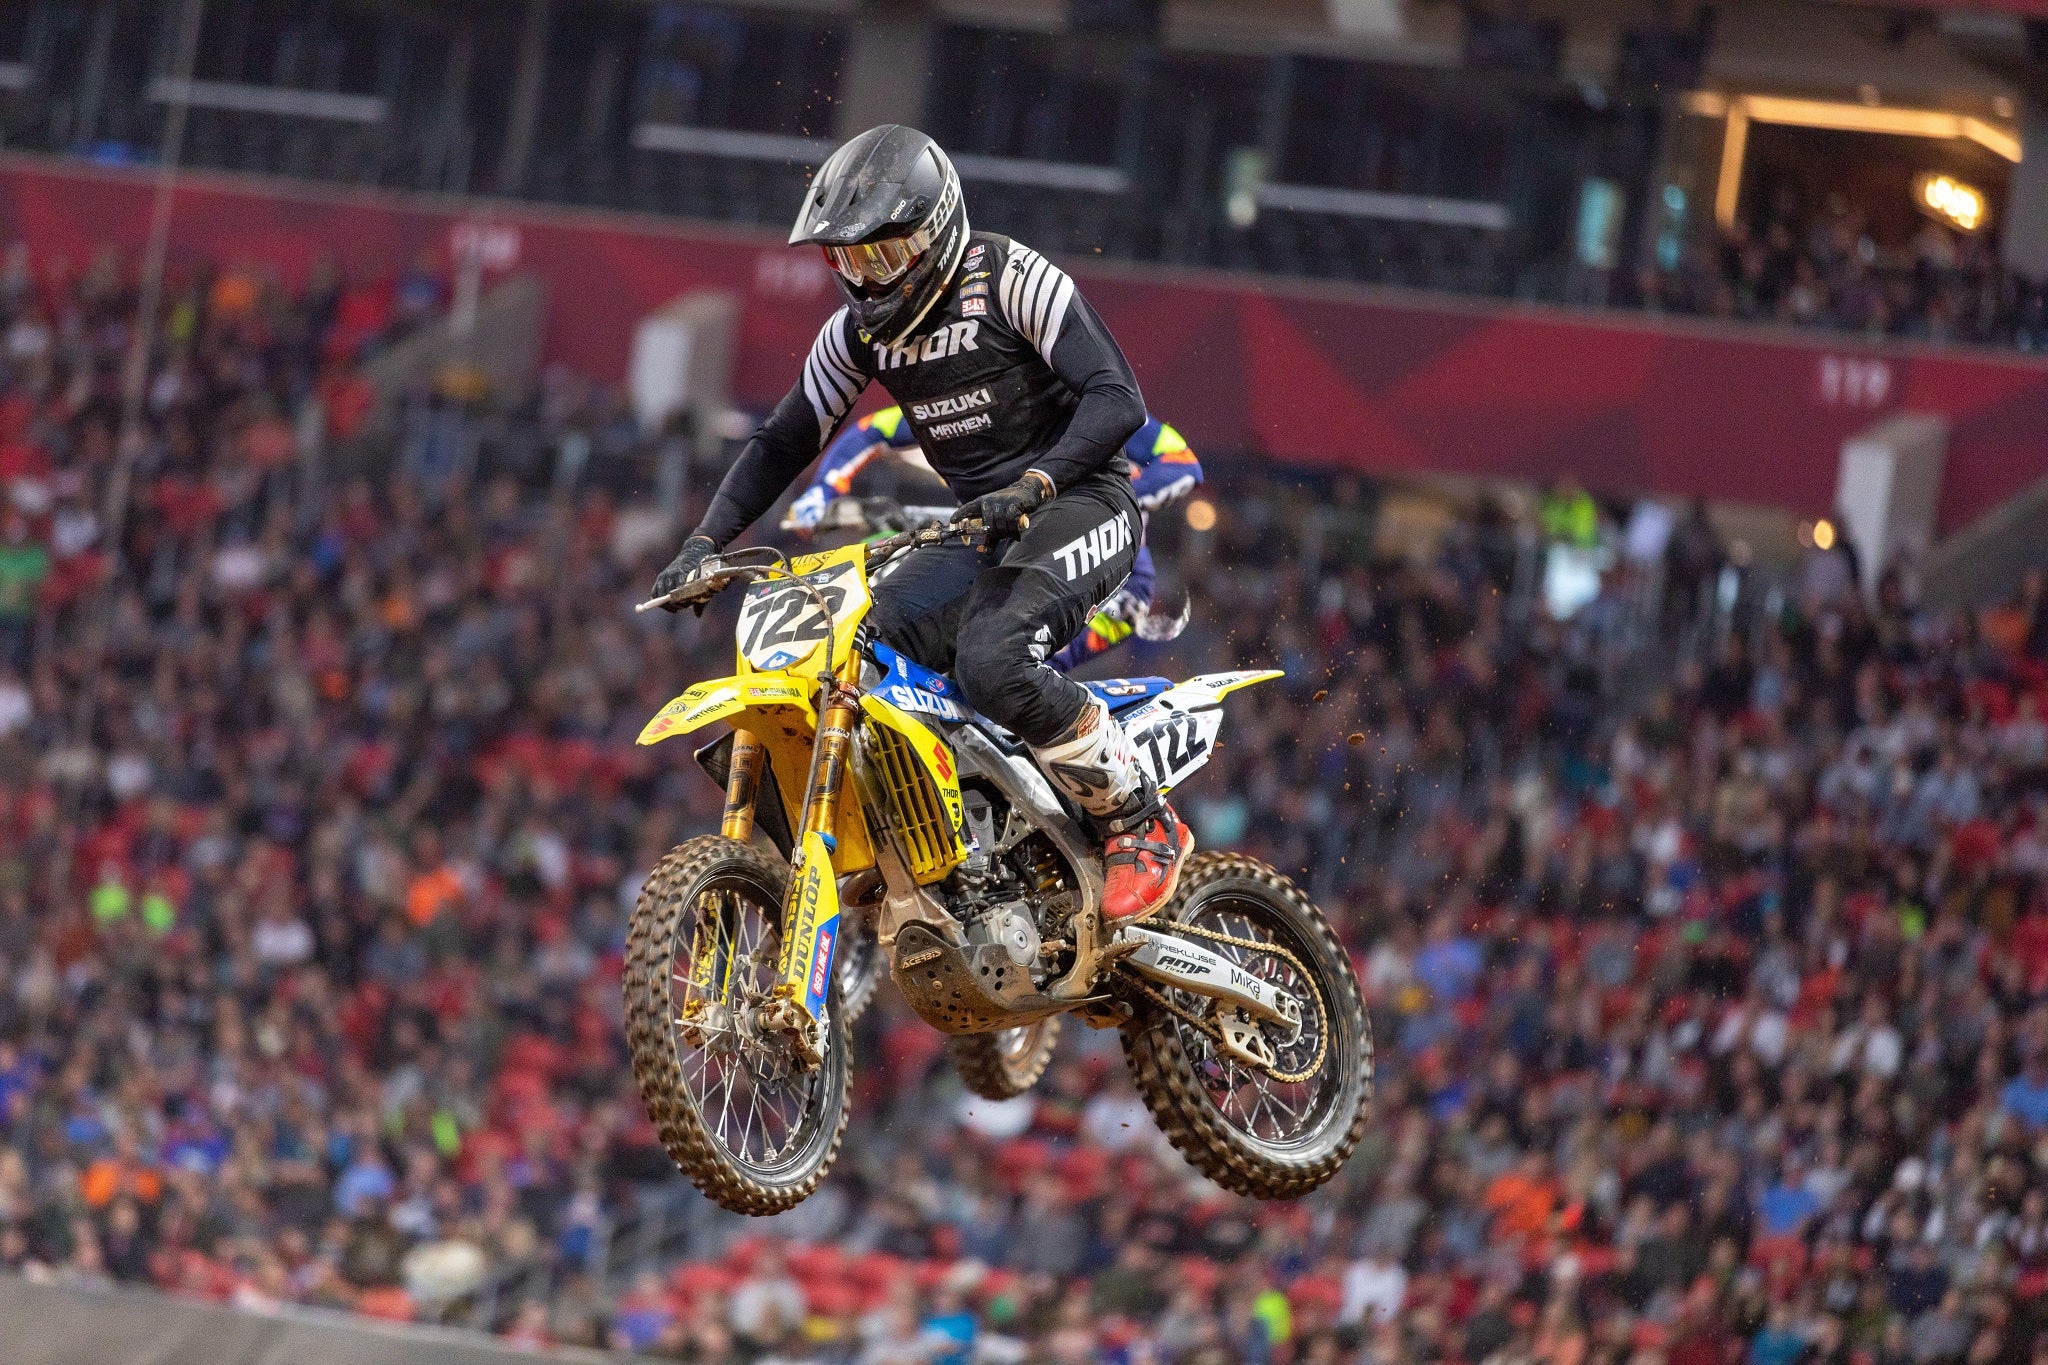 Adam Enticknap (#722) finishes in 17th place in the 450cc Premiere Class